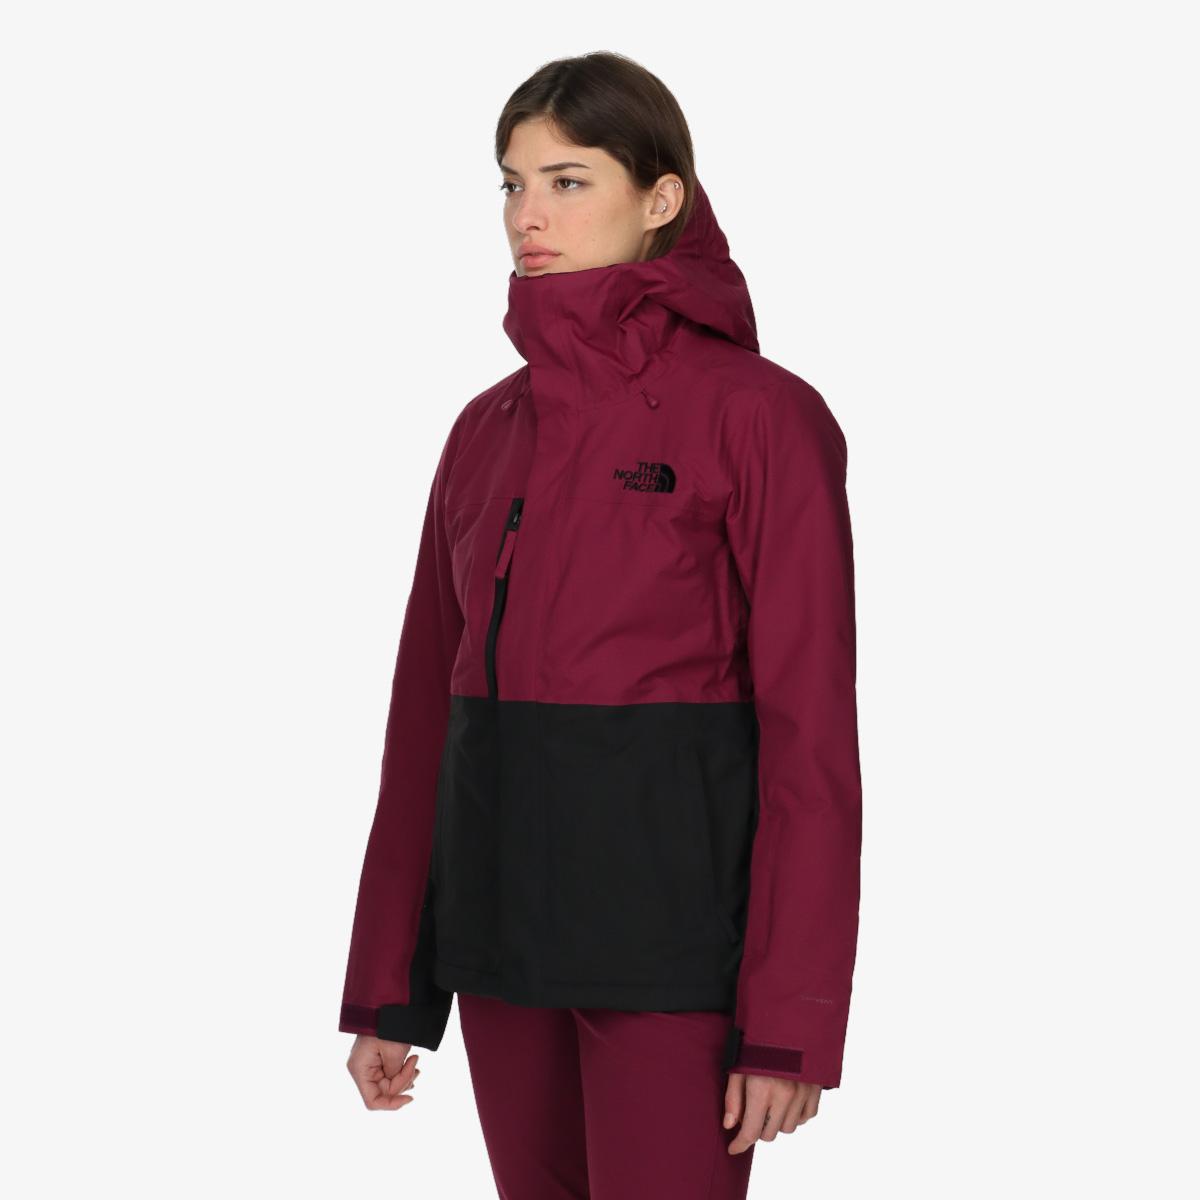 THE NORTH FACE WOMEN’S FREEDOM INSULATED JACKET 